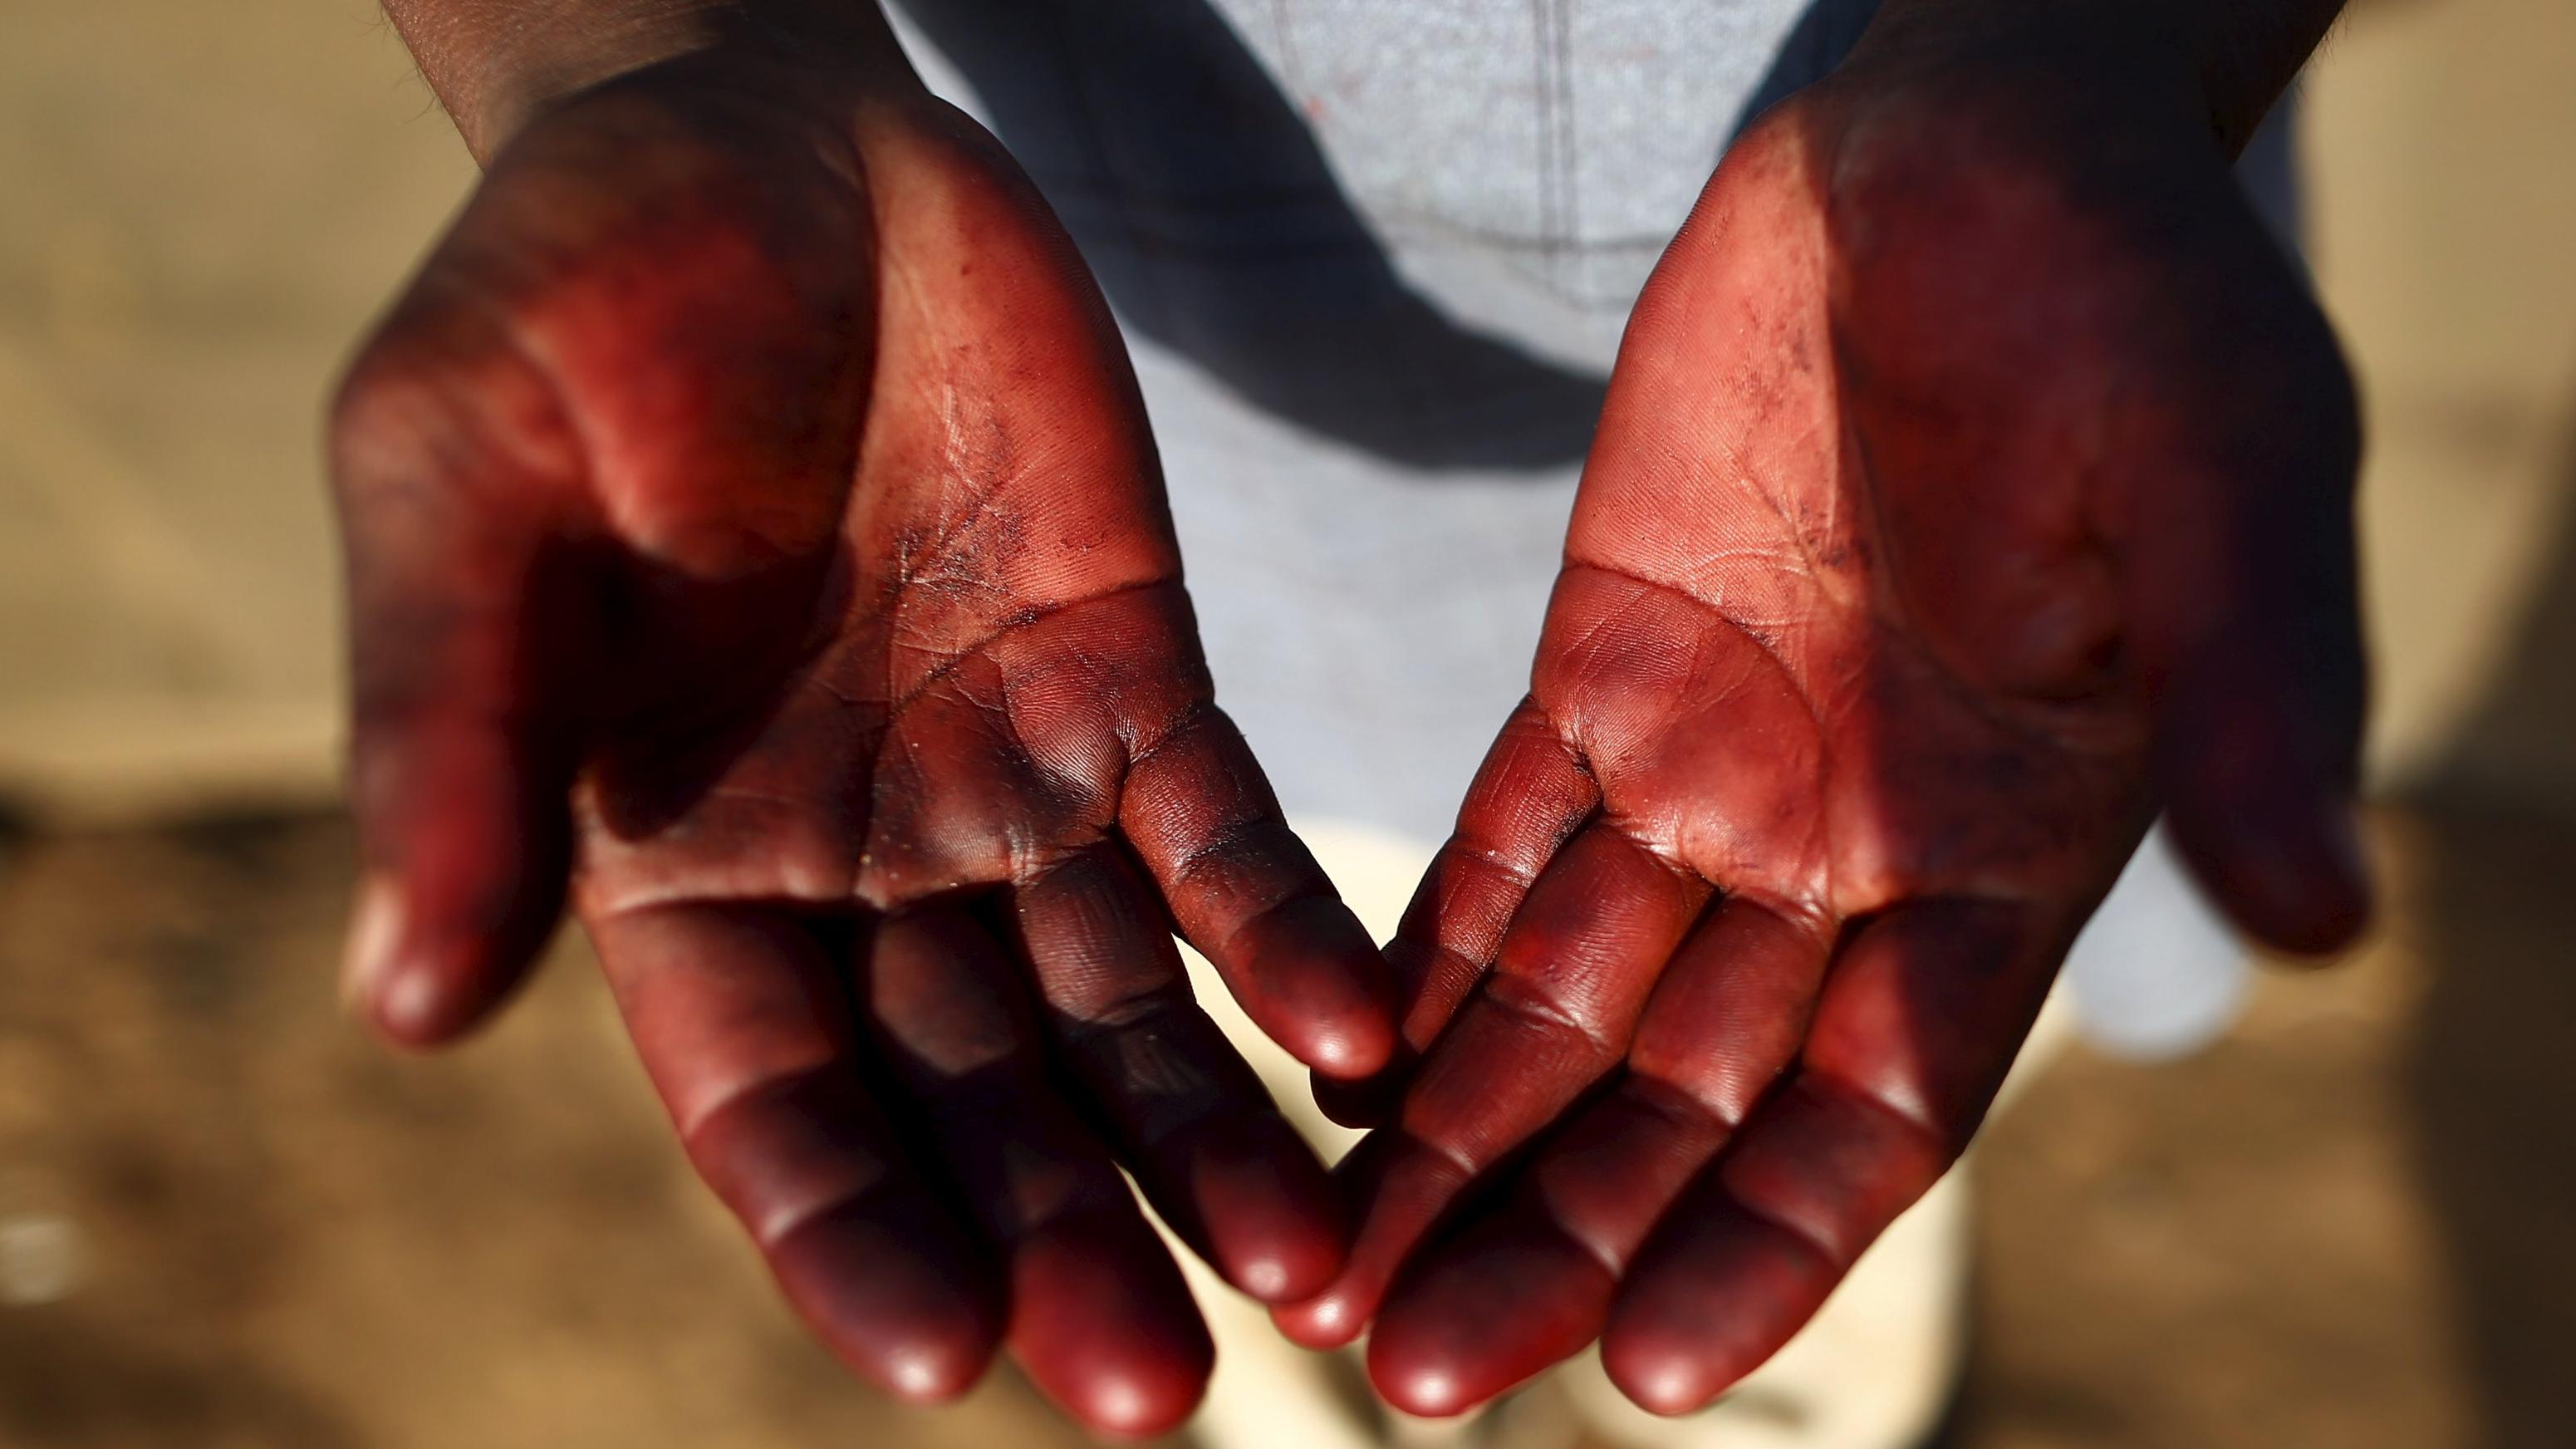 Genaro Perfecto, who works as a fruit picker, shows his hands which are stained with strawberry juice in San Quintin in Baja California state, Mexico April 1, 2015.